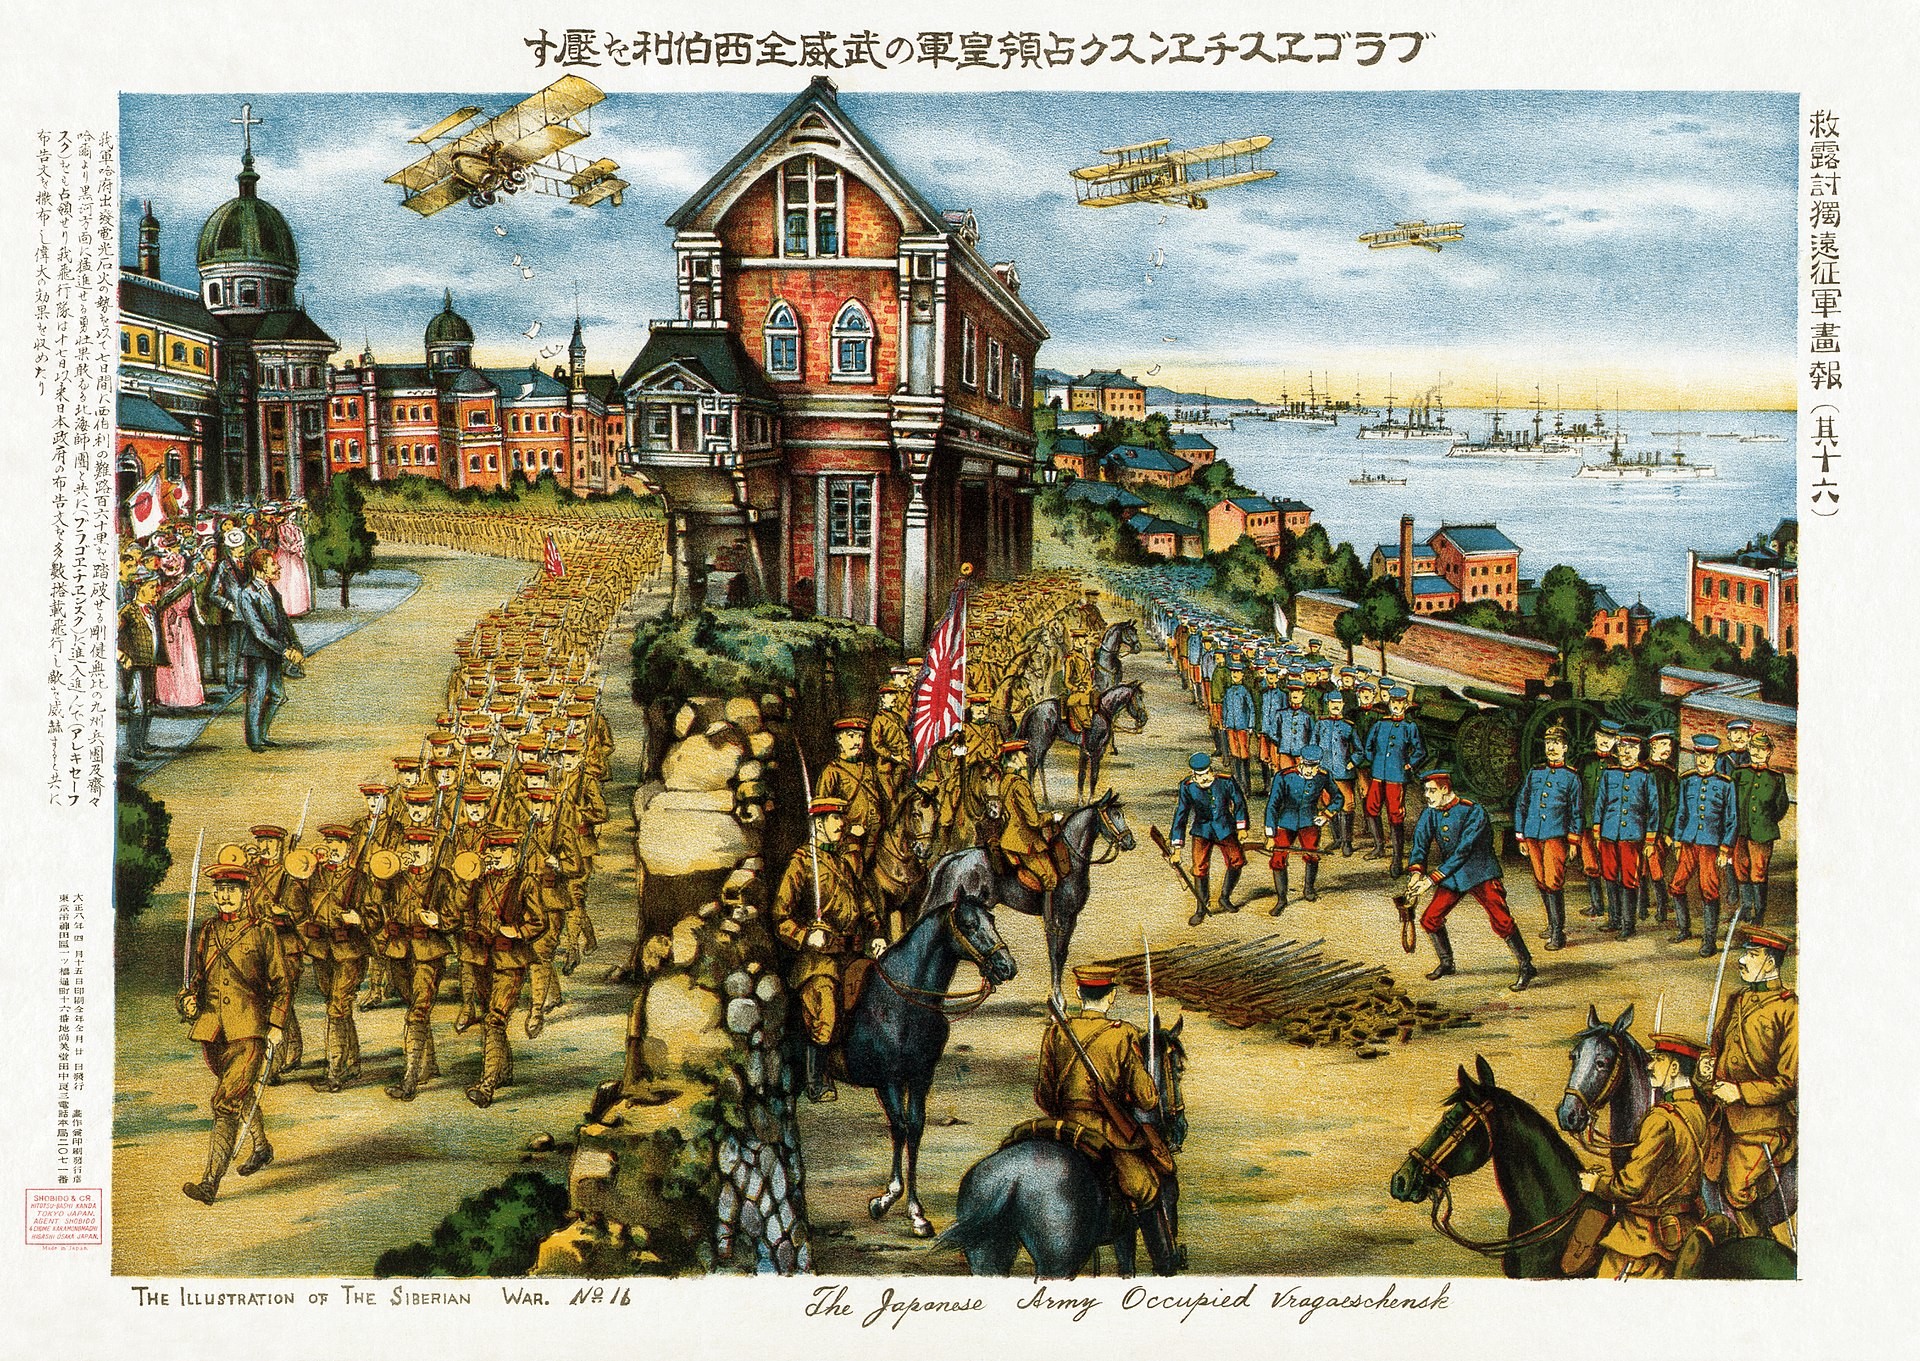 From "The Illustration of The Siberian War." This image is titled, "No. 16. The Japanese Army Occupied Vragaeschensk."